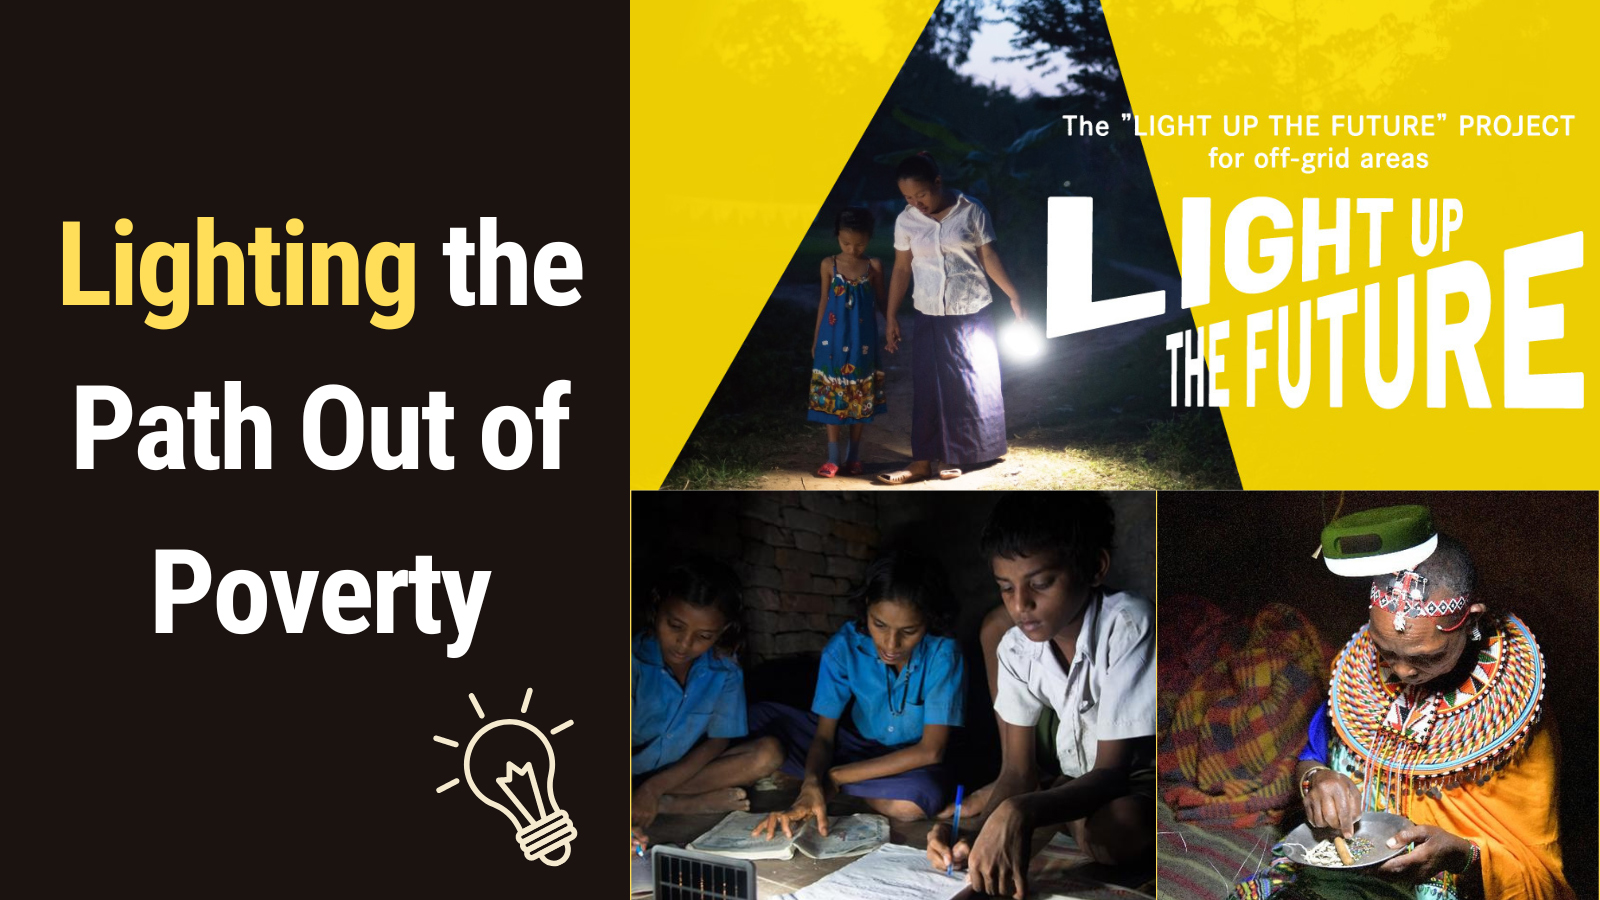 Lighting the Path Out of Poverty for Off-Grid Communities